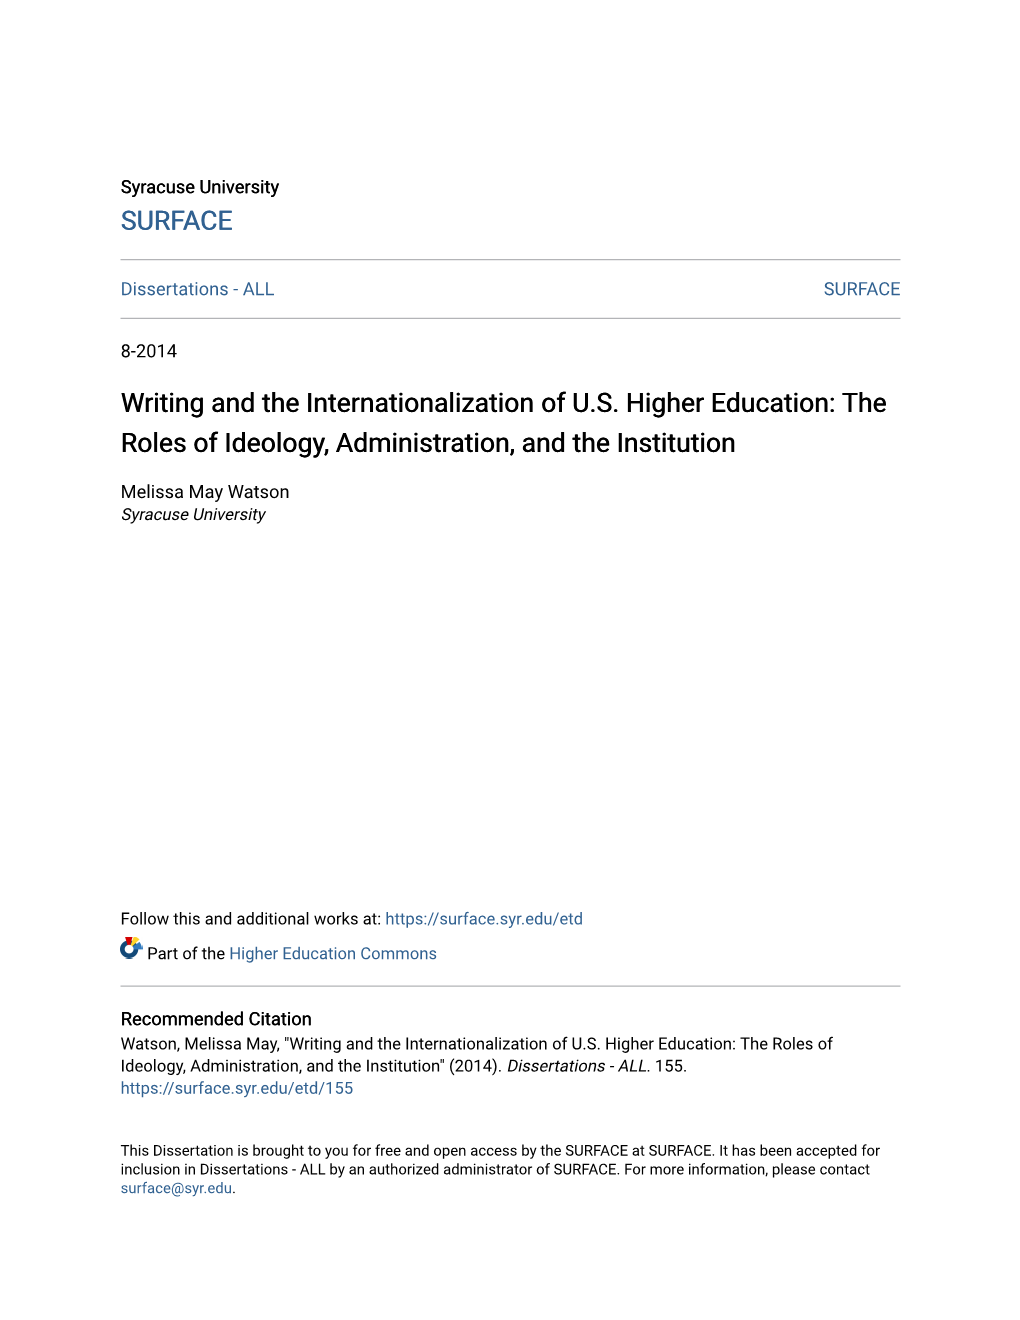 Writing and the Internationalization of Us Higher Education: the Roles of Ideology, Administration, and the Institution